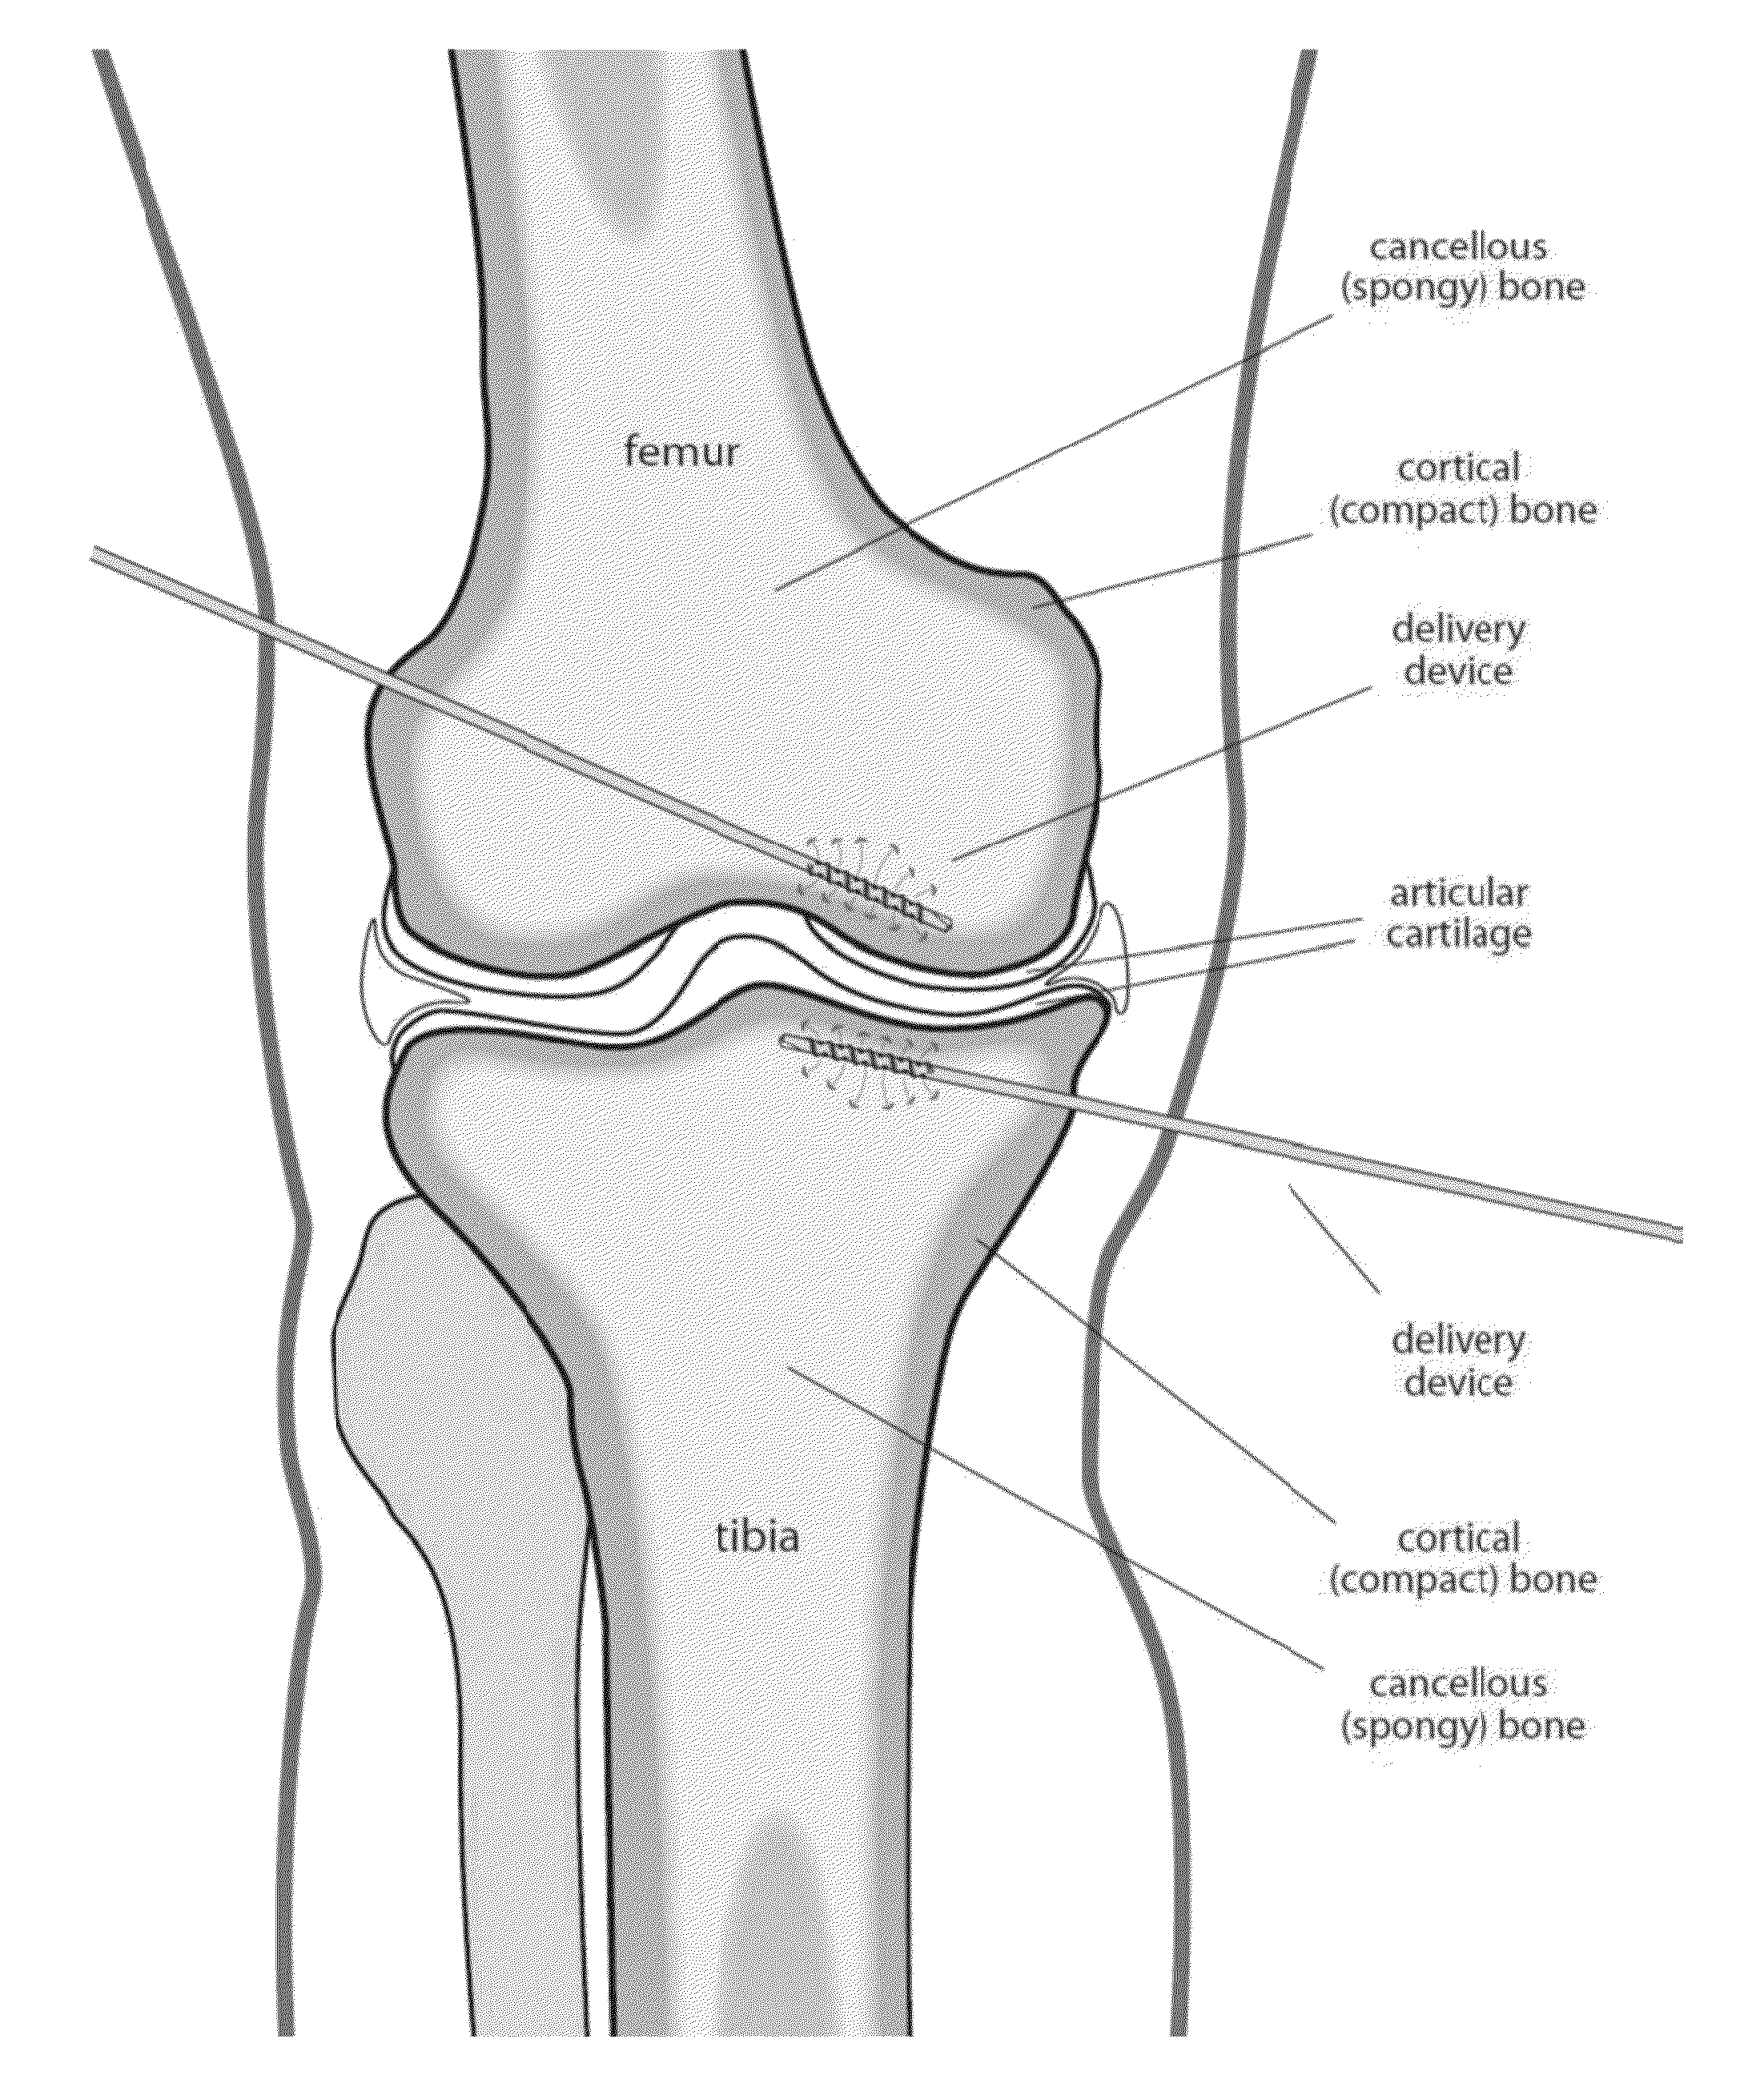 Cartilage repair, preservation and growth by stimulation of bone-chondral interfase and delivery system and methods therefor